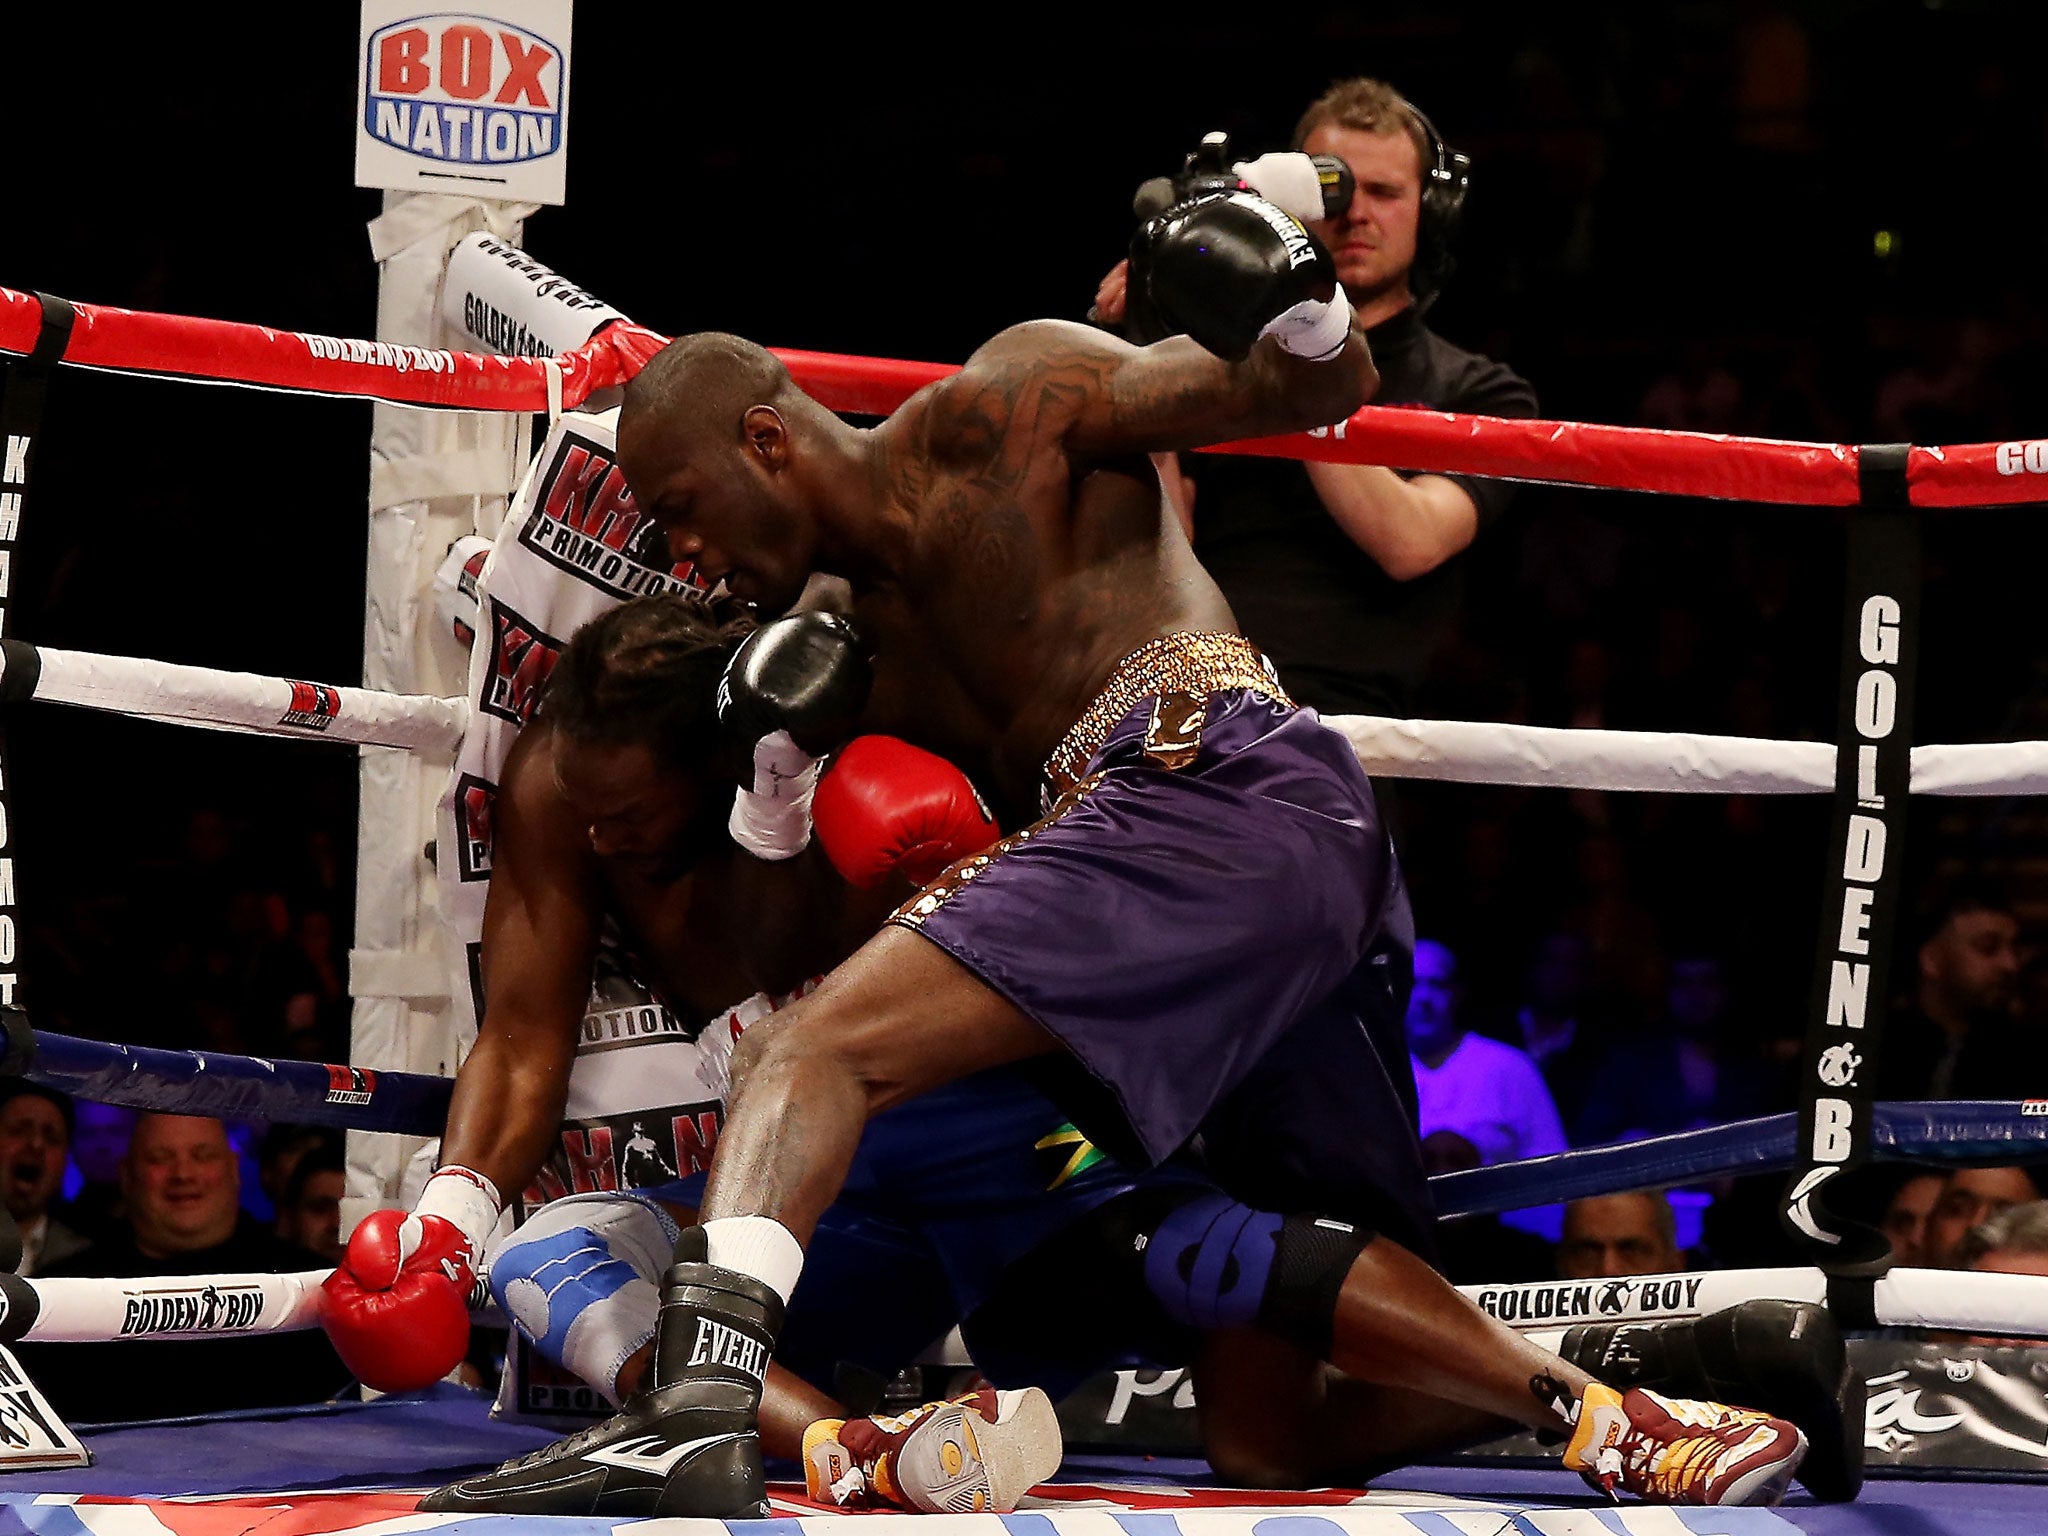 No quarter: Deontay Wilder keeps battering Audley Harrison after hitting the British fighter with a big right hand